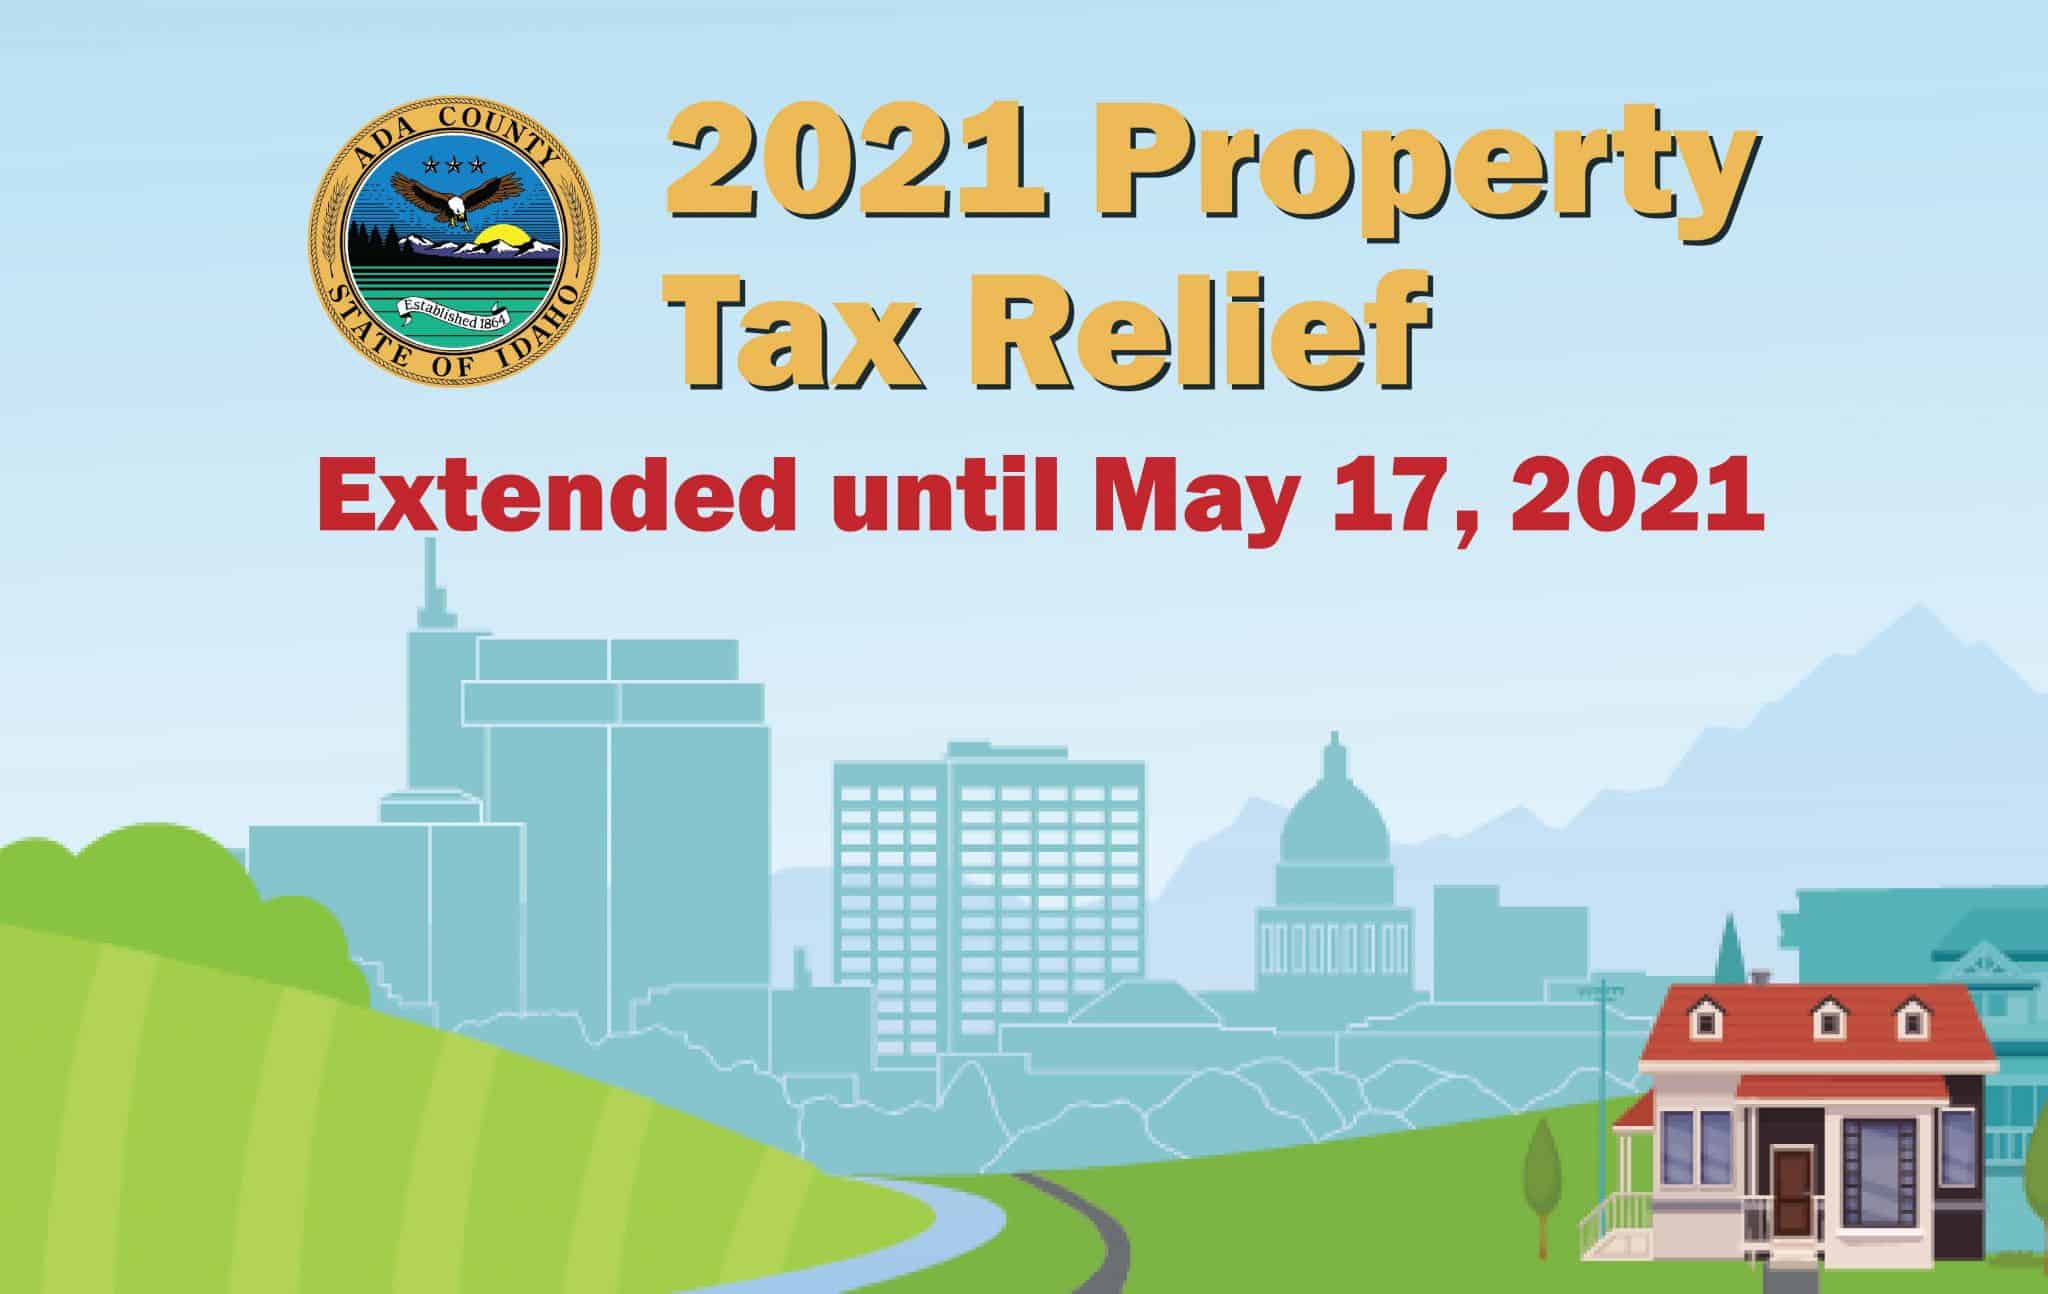 2021 Property Tax Relief